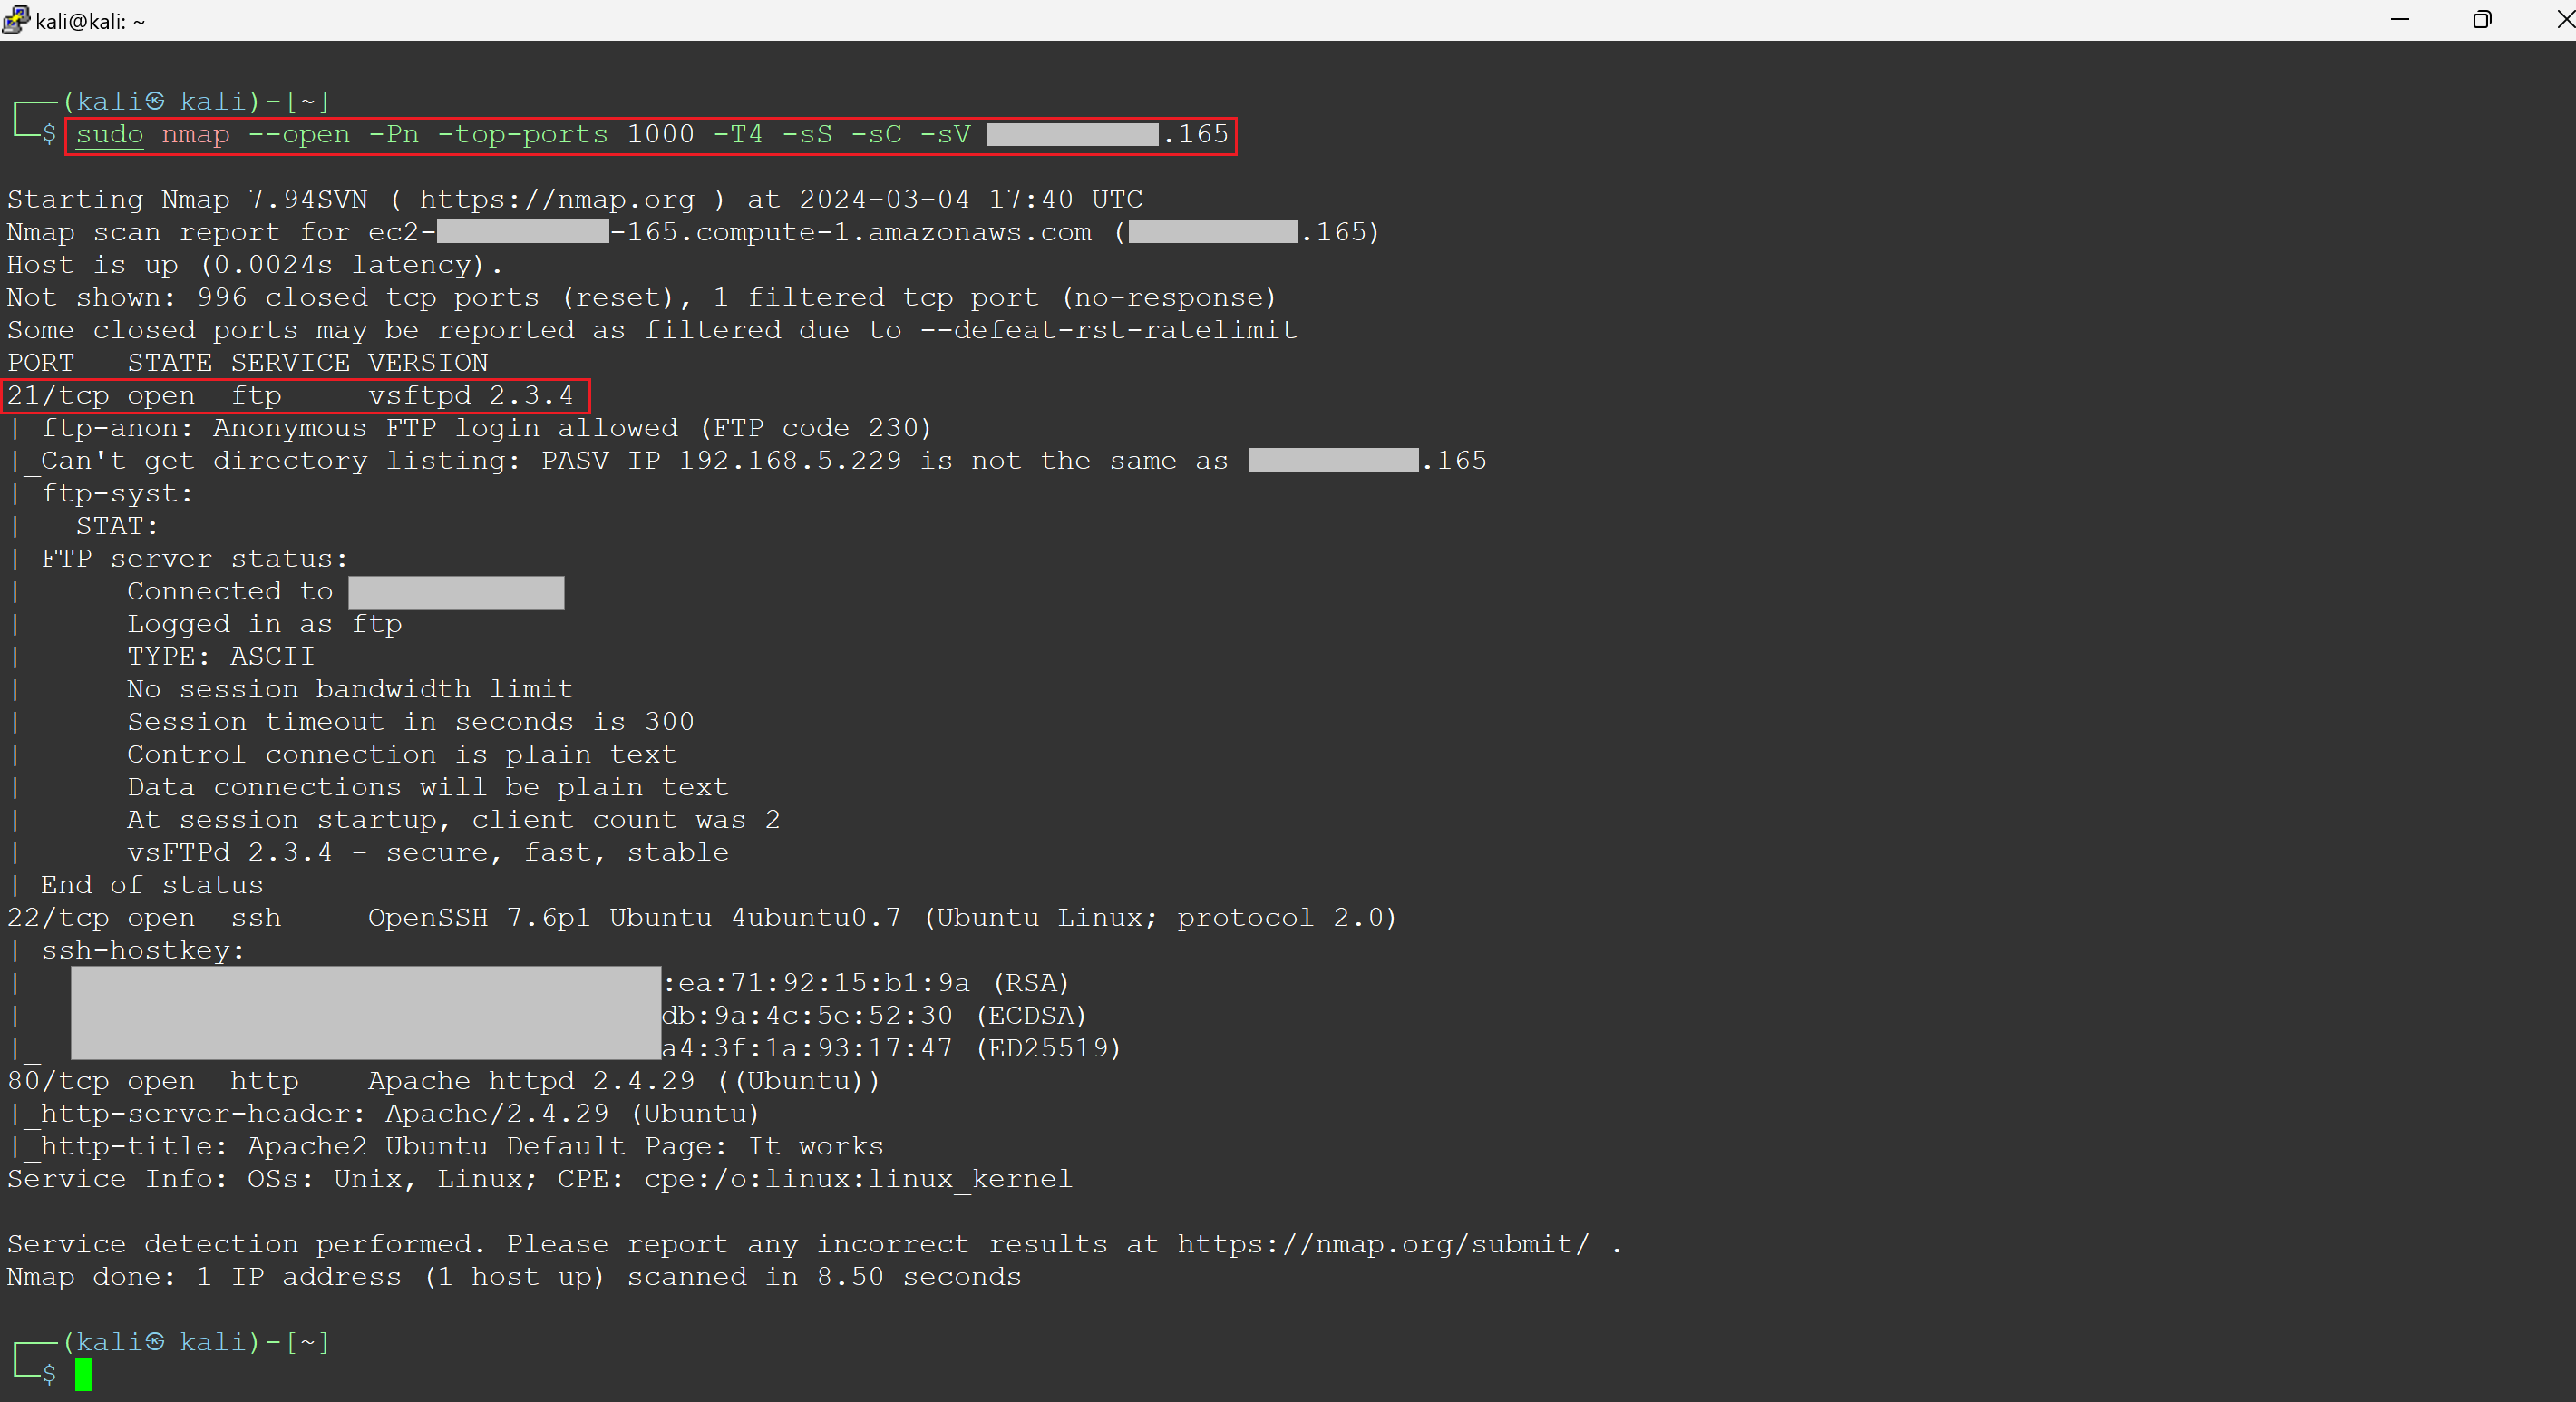 Attacker performing nmap scan on a target instance